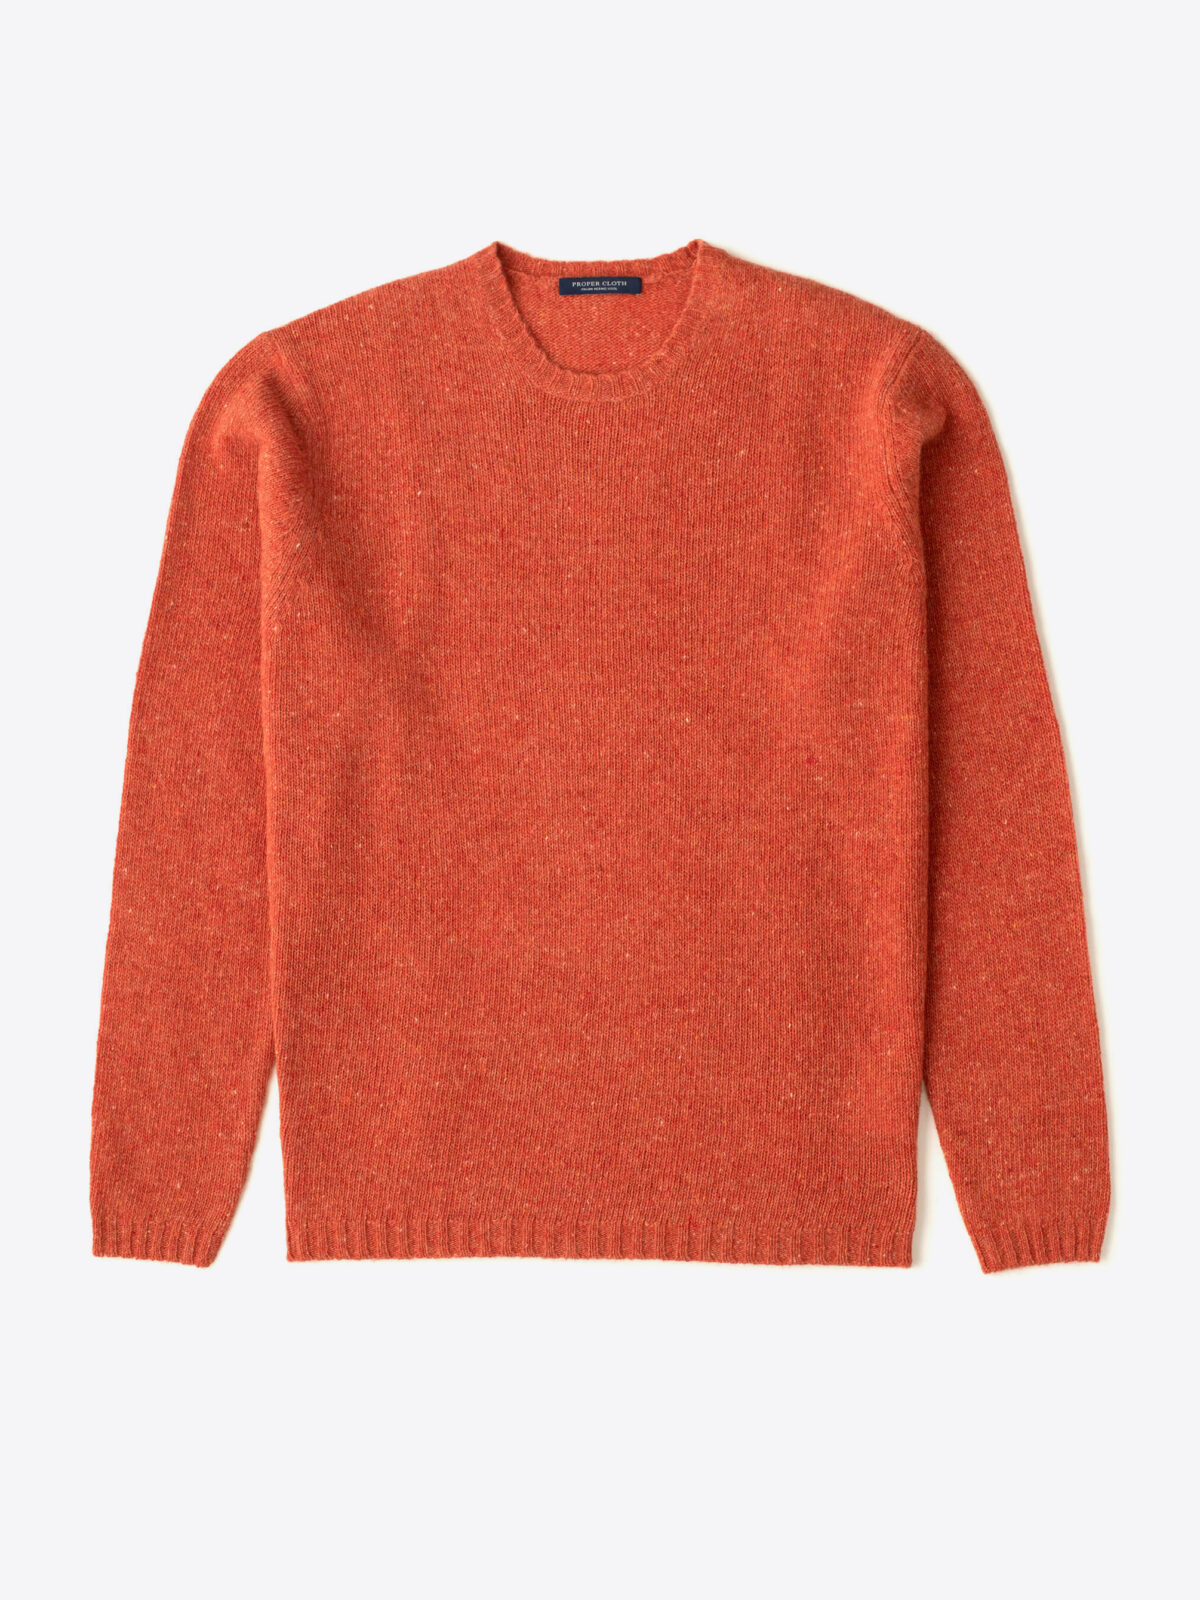 Pumpkin Donegal Lambswool Sweater by Proper Cloth